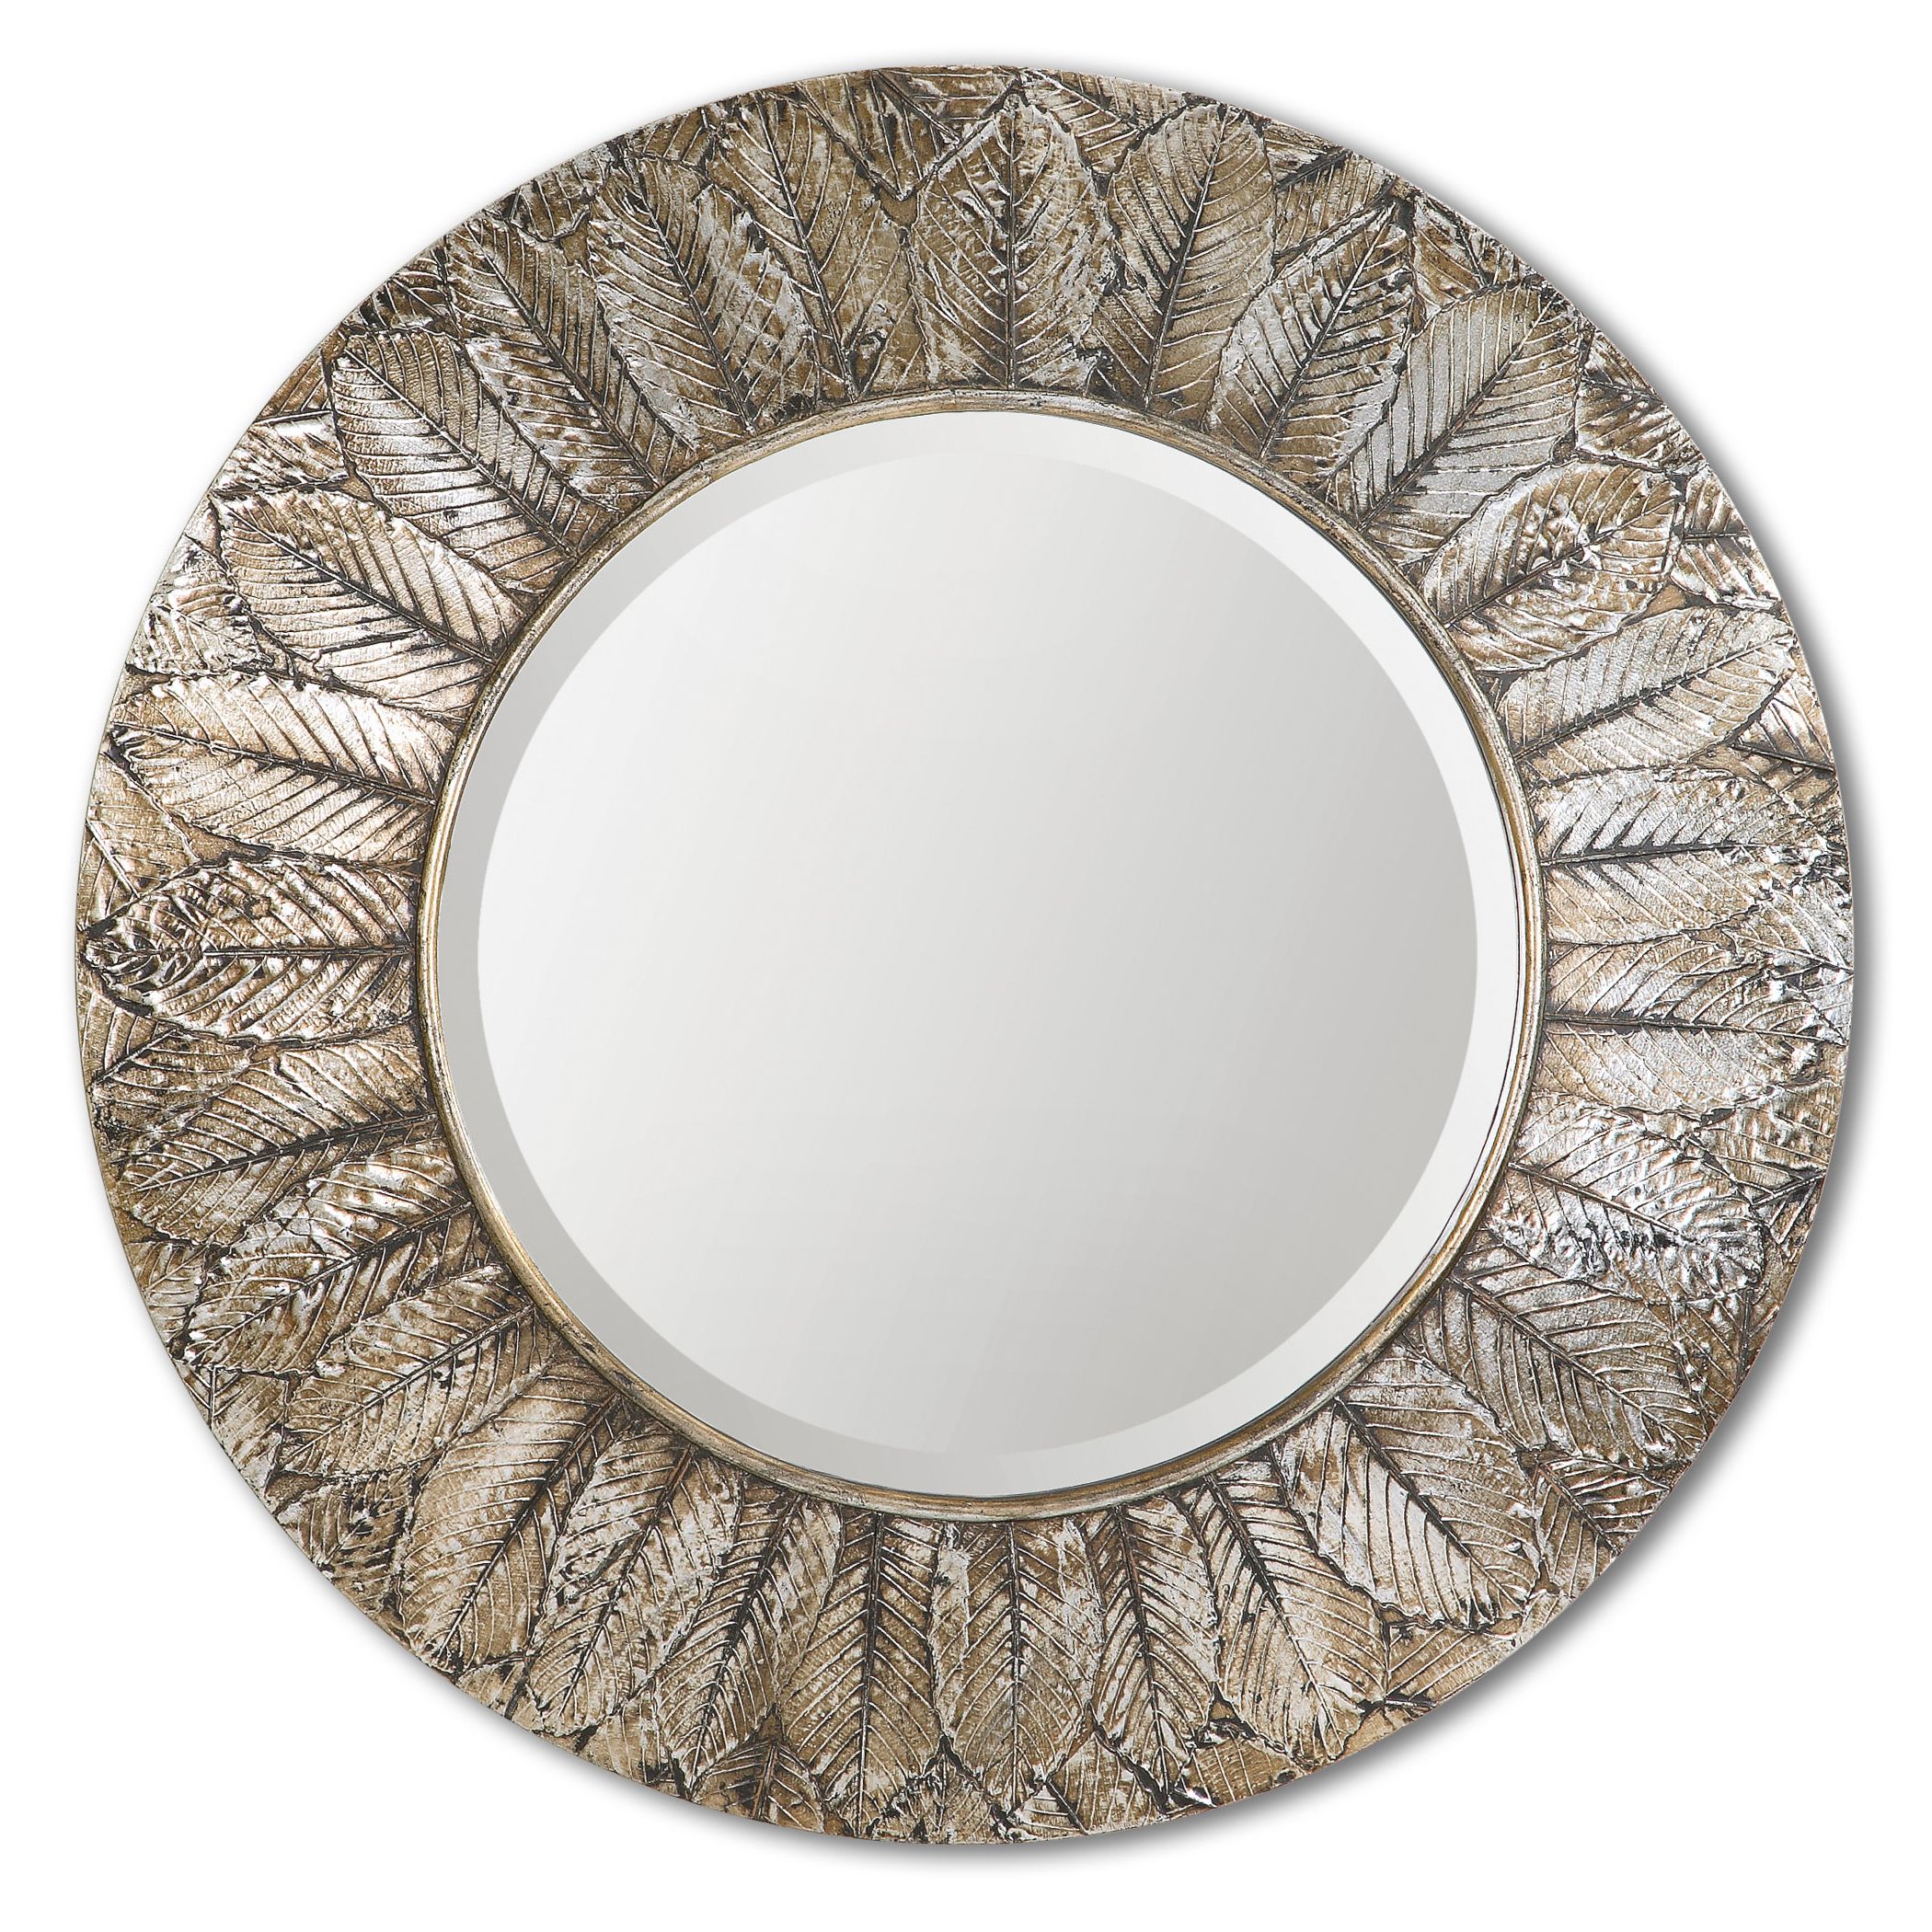 Famous Gold Leaf Floor Mirrors In Uttermost Foliage Round Silver Leaf Mirror (View 14 of 15)